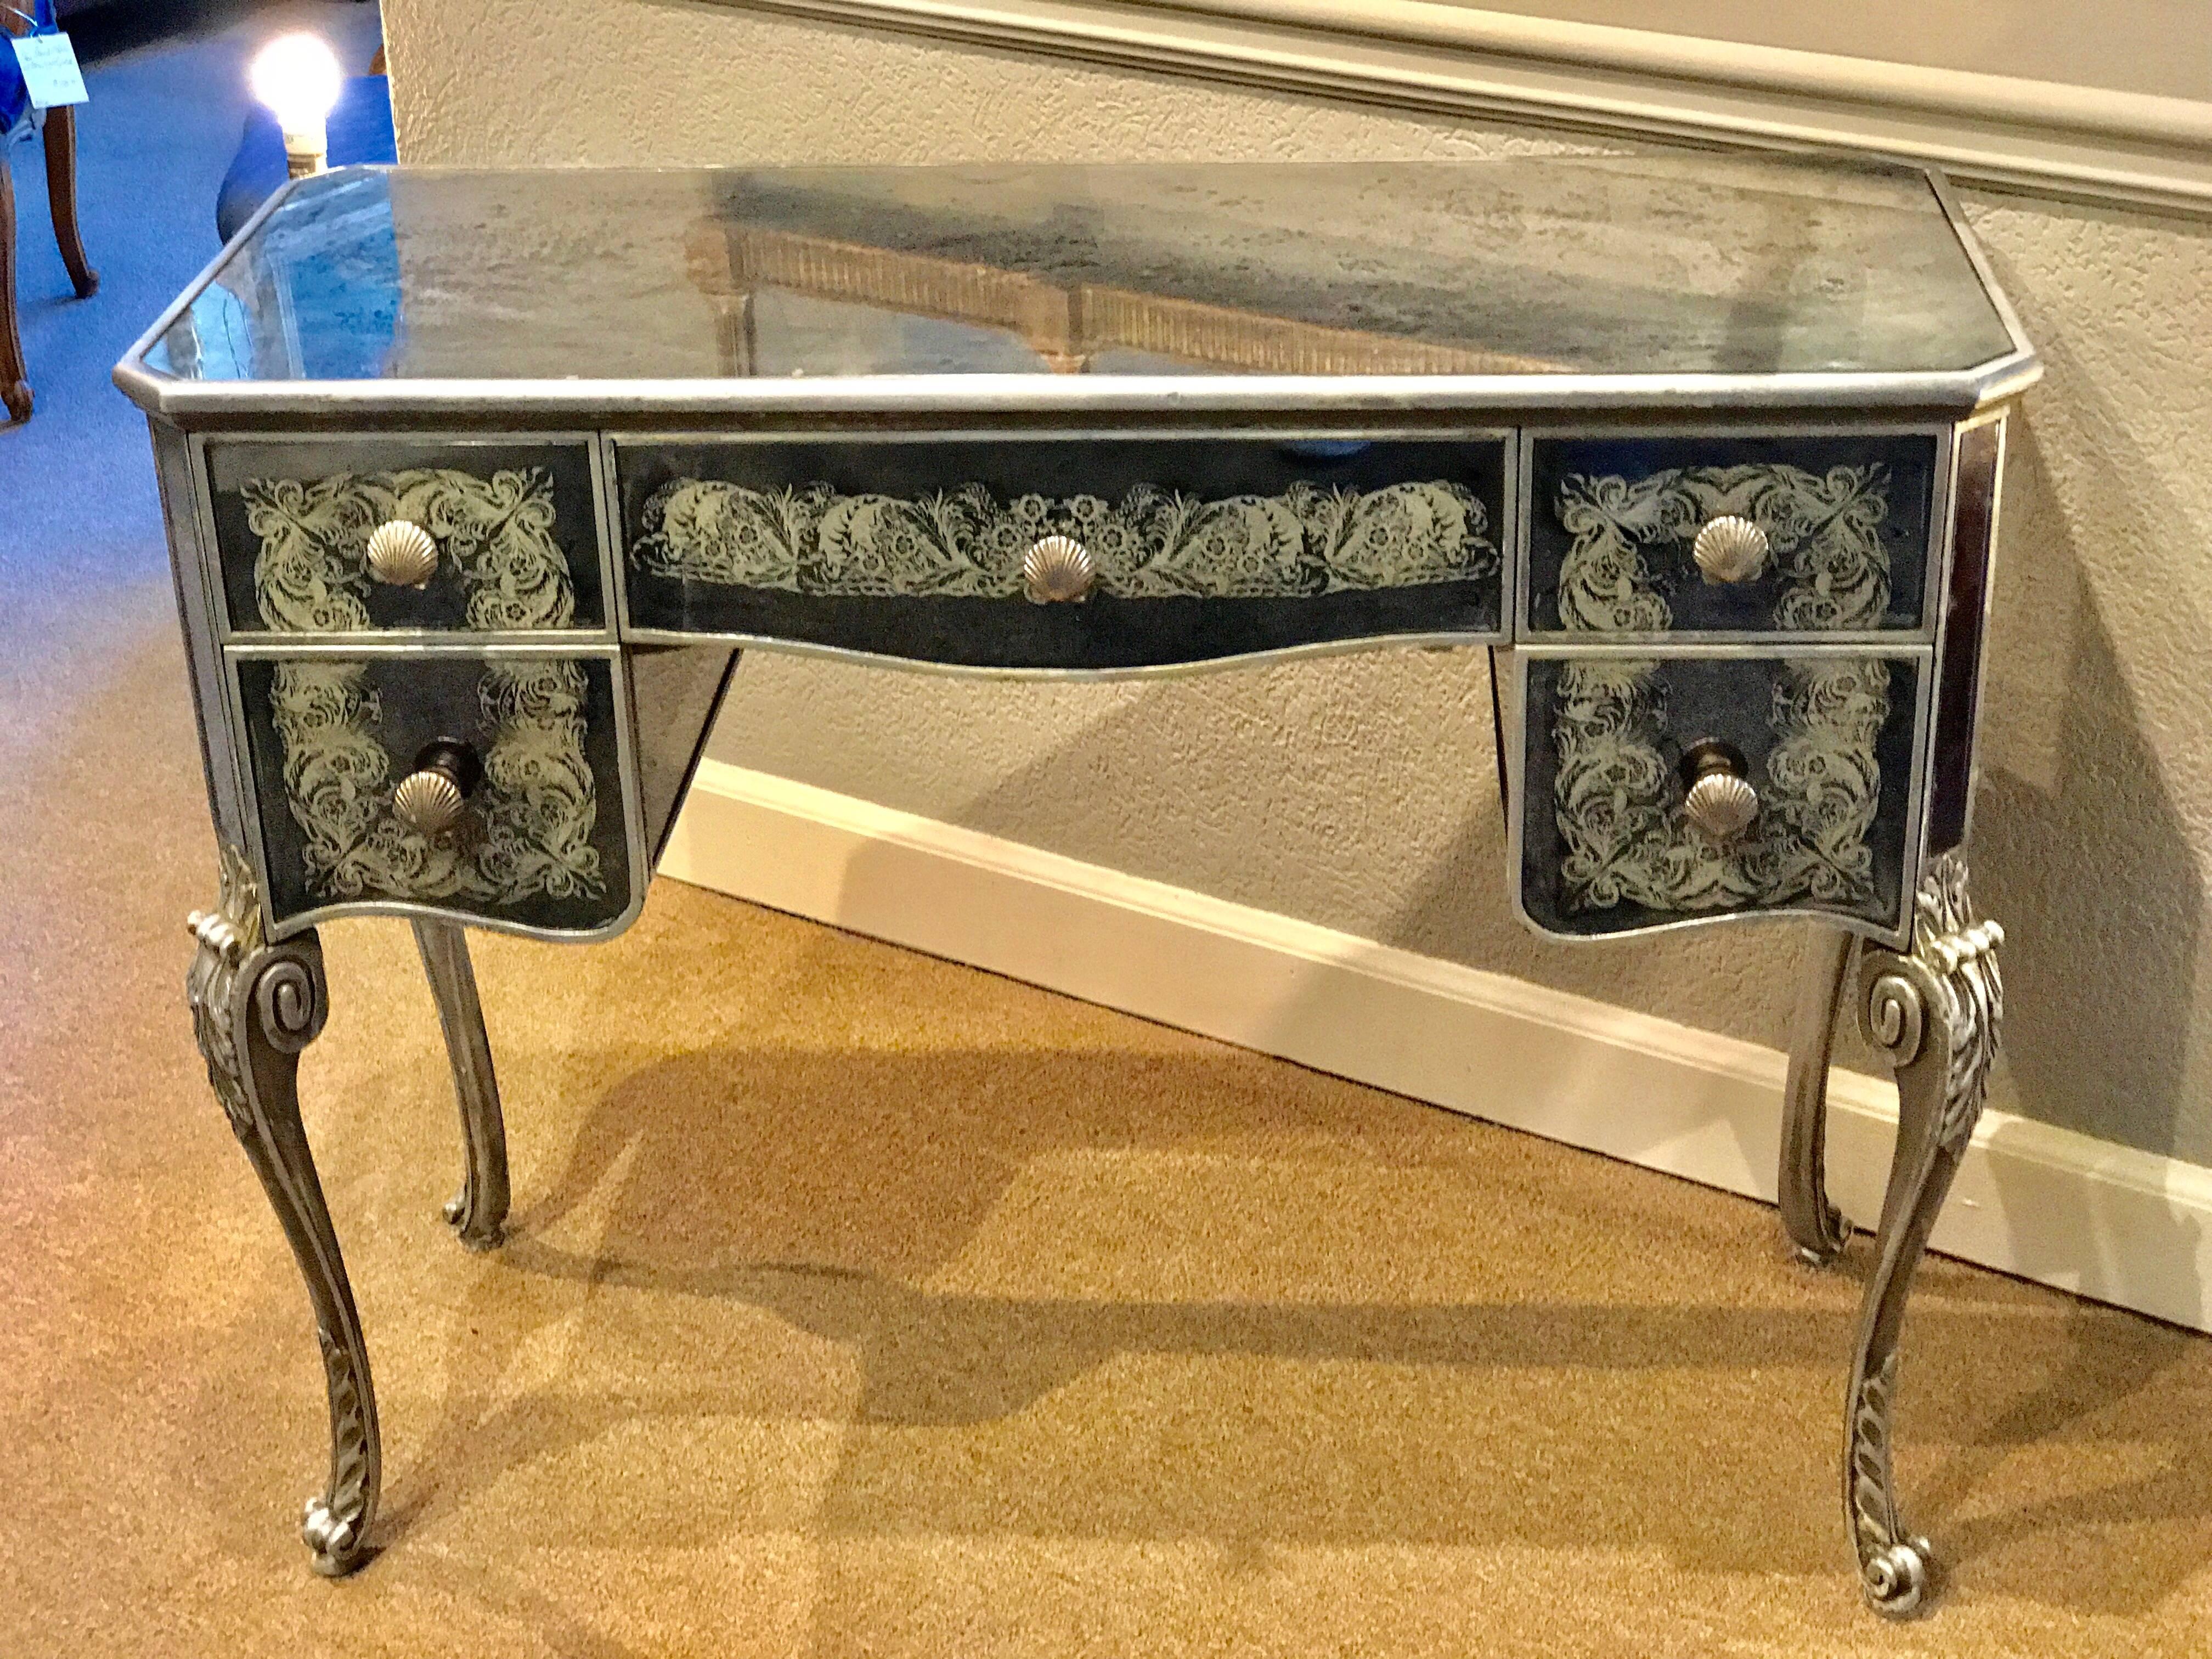 Silvered French Art Deco Mirrored Desk or Vanity